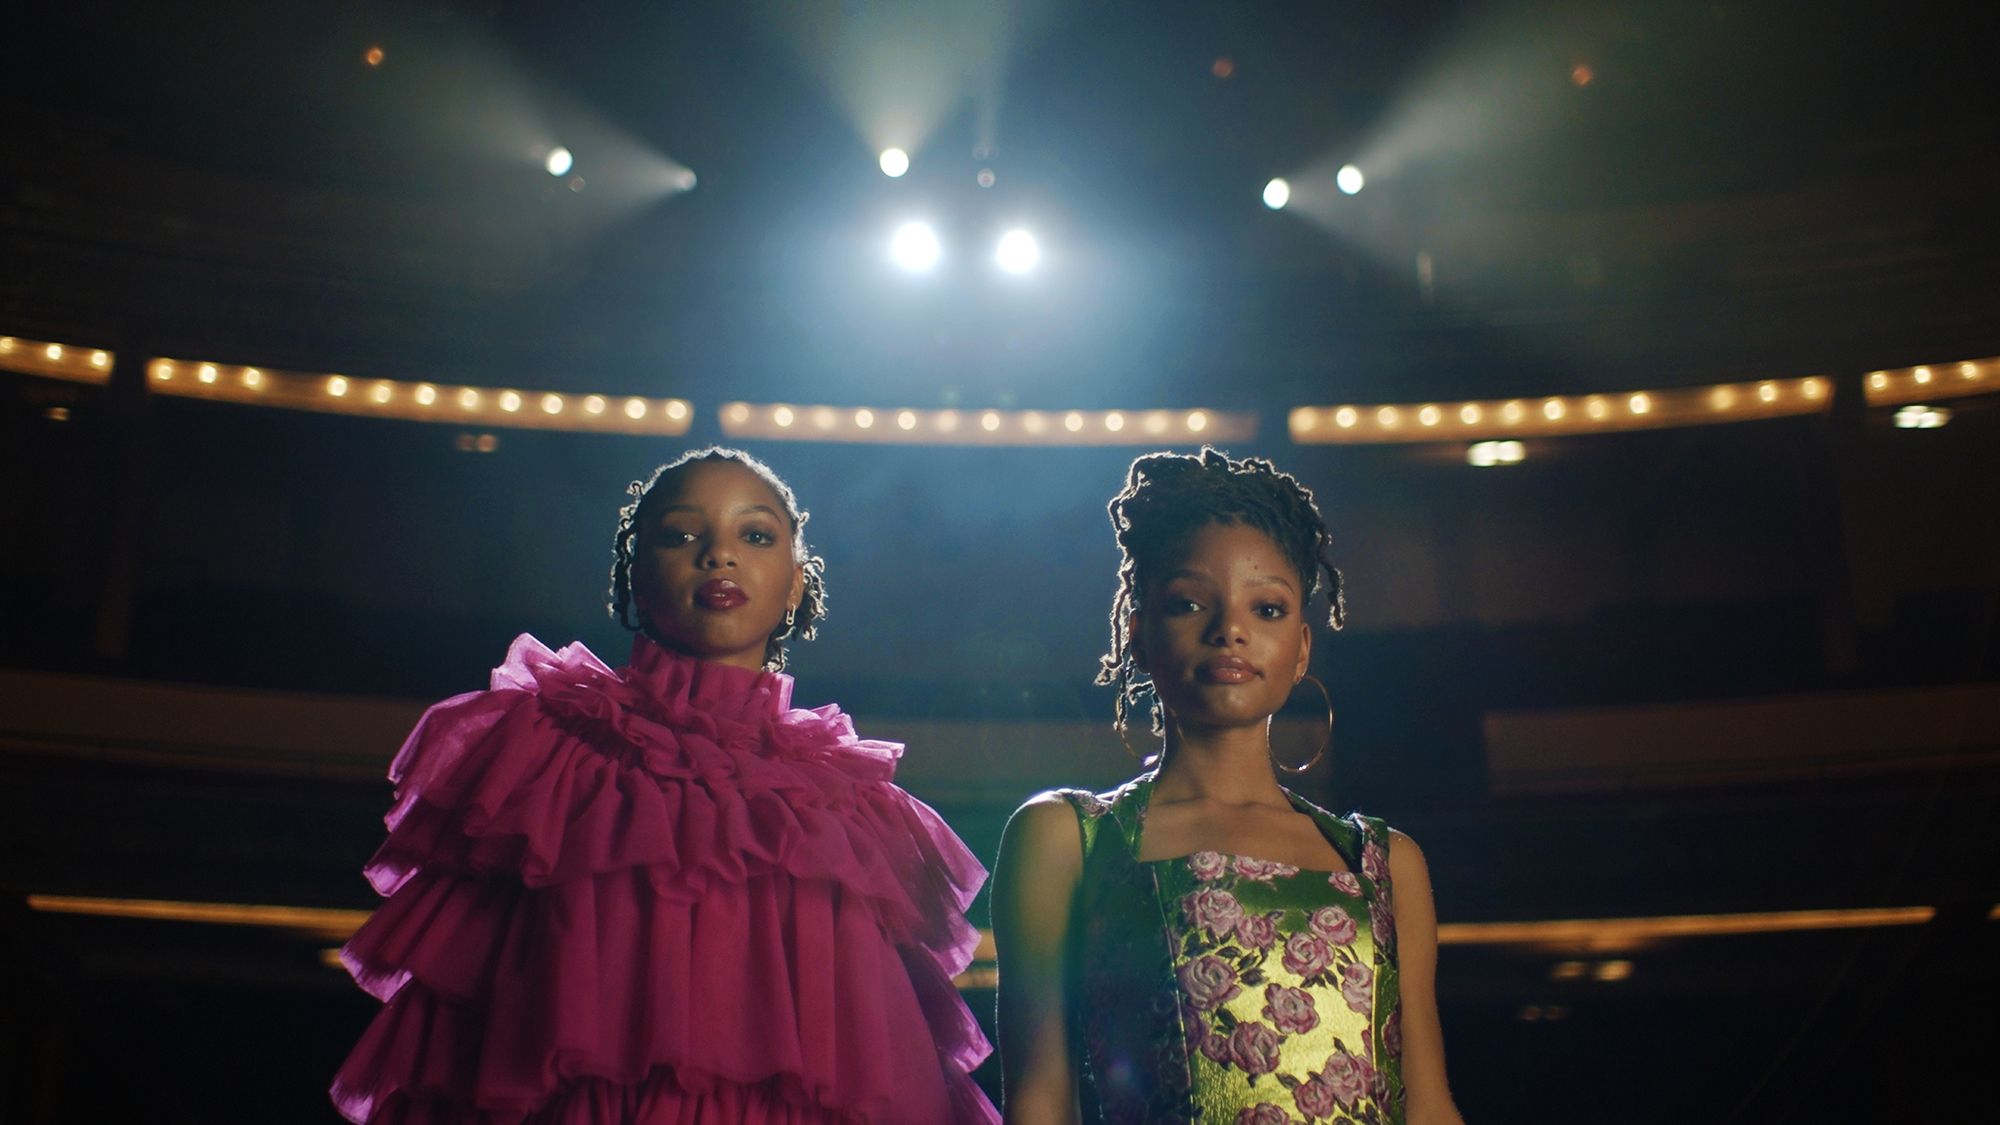 2 women, Chloe and Halle, on stage with lights and balcony behind them